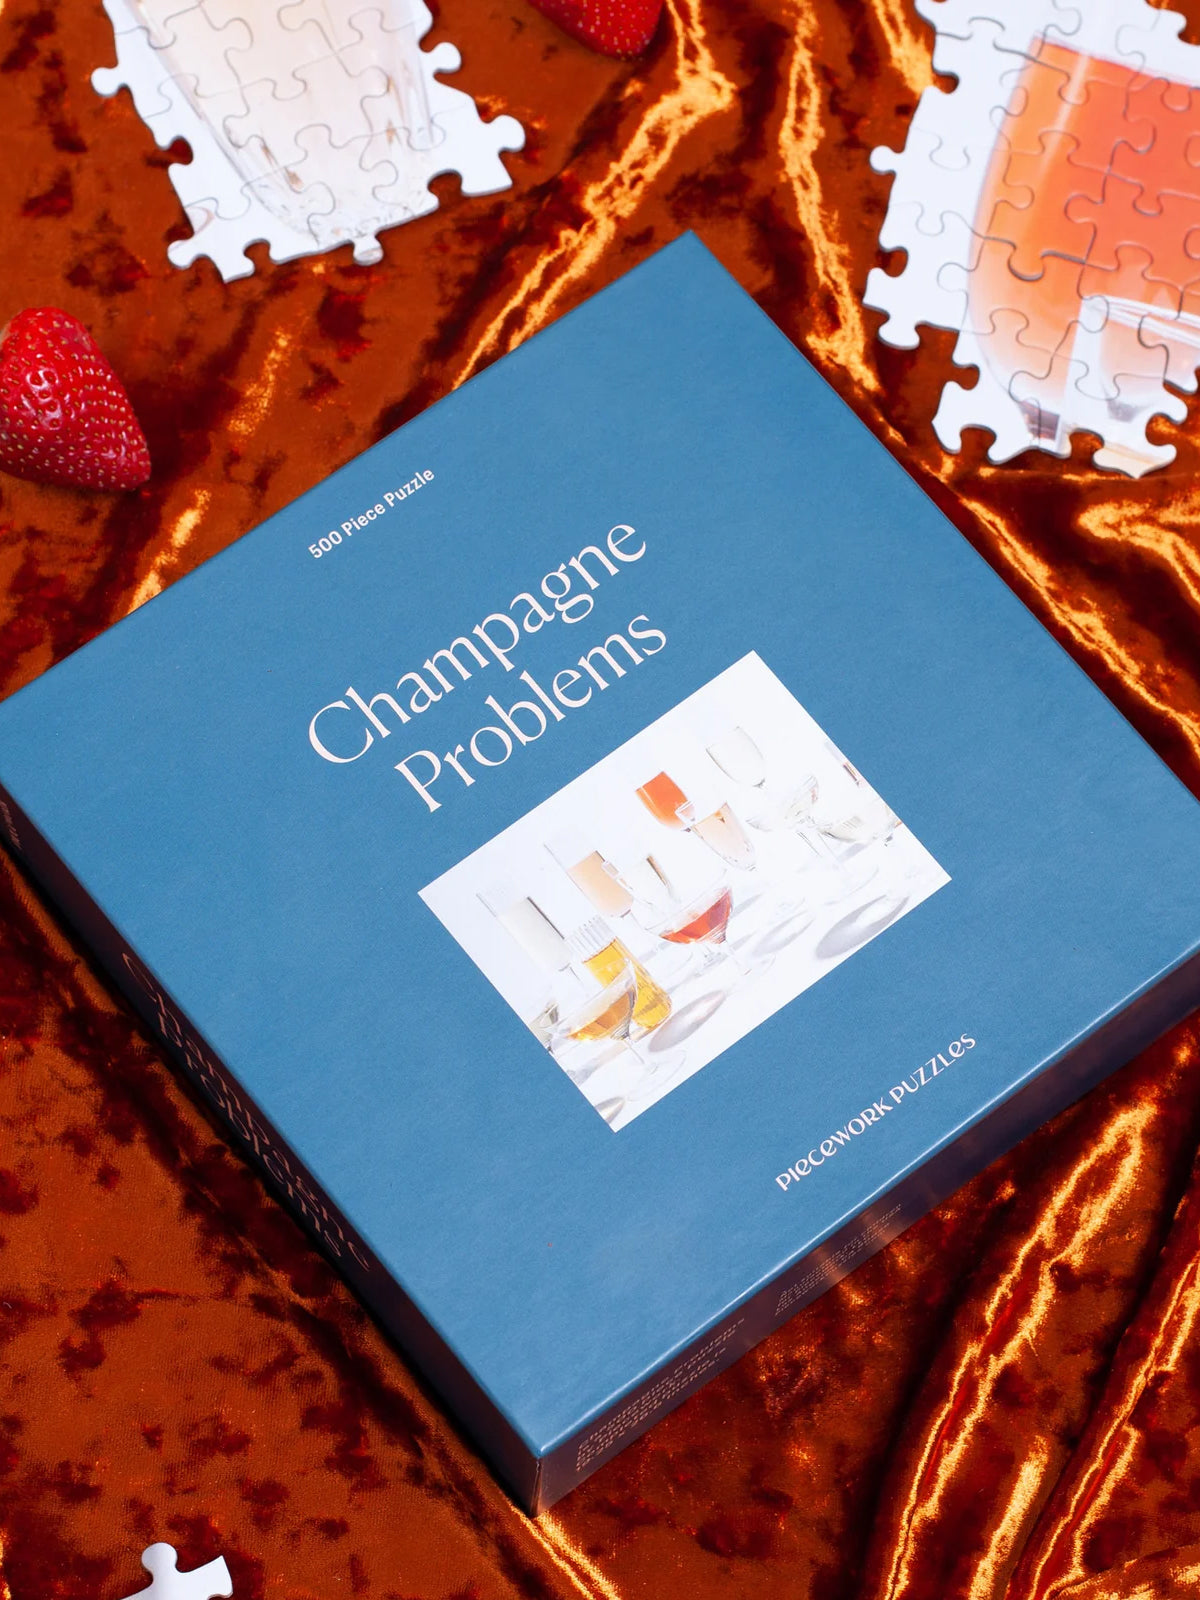 Champagne Problems Puzzle